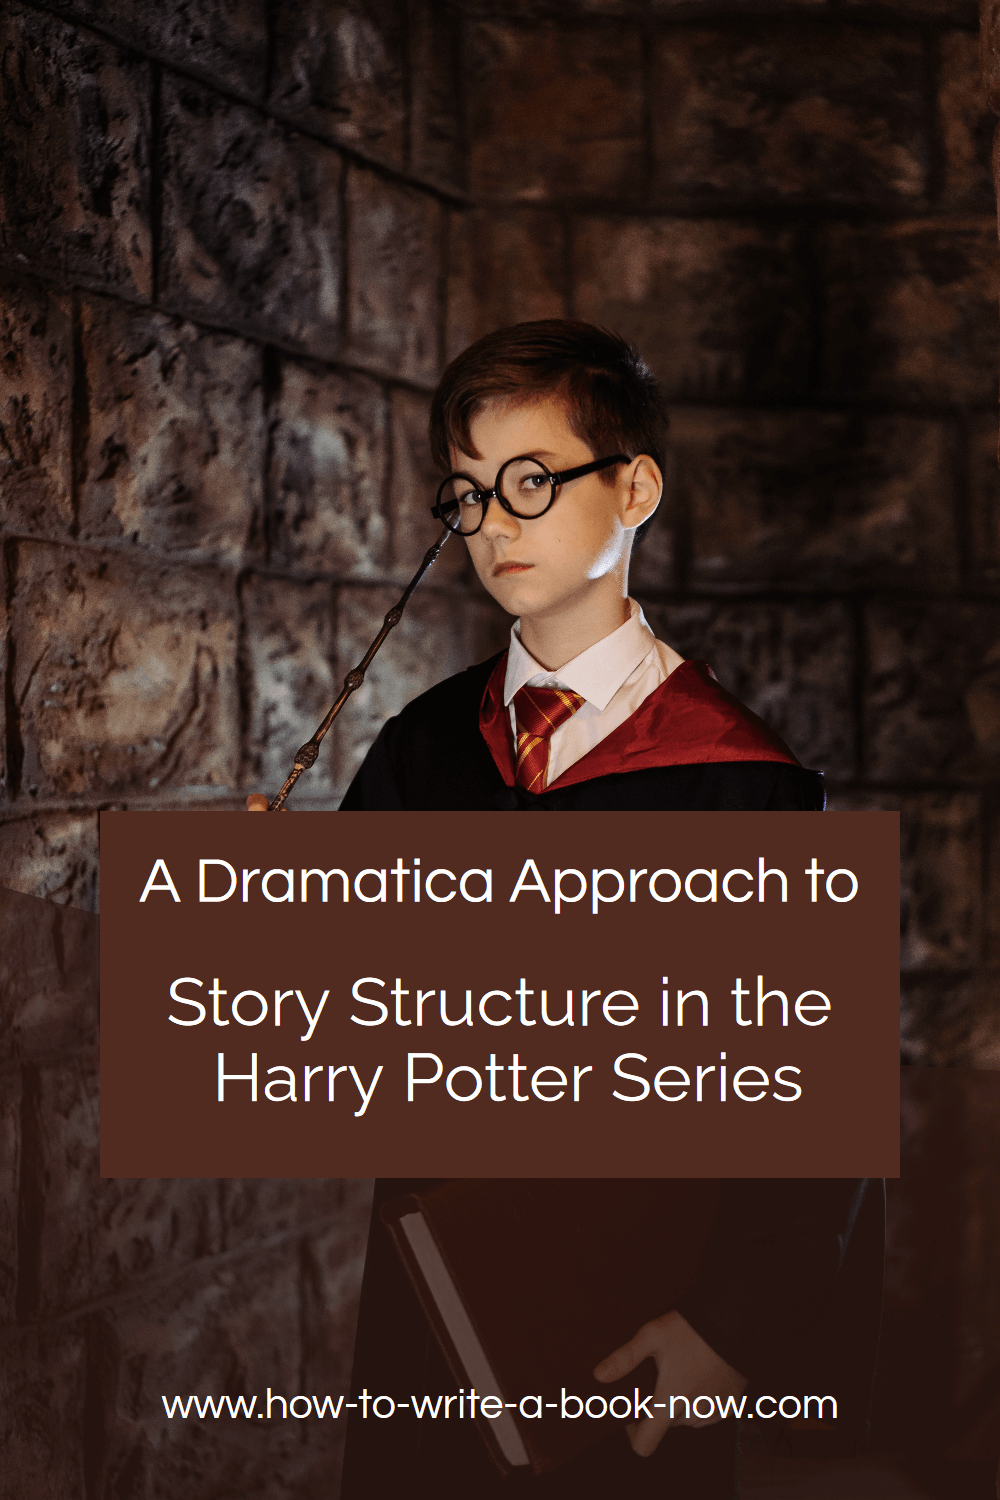 Harry Potter structure